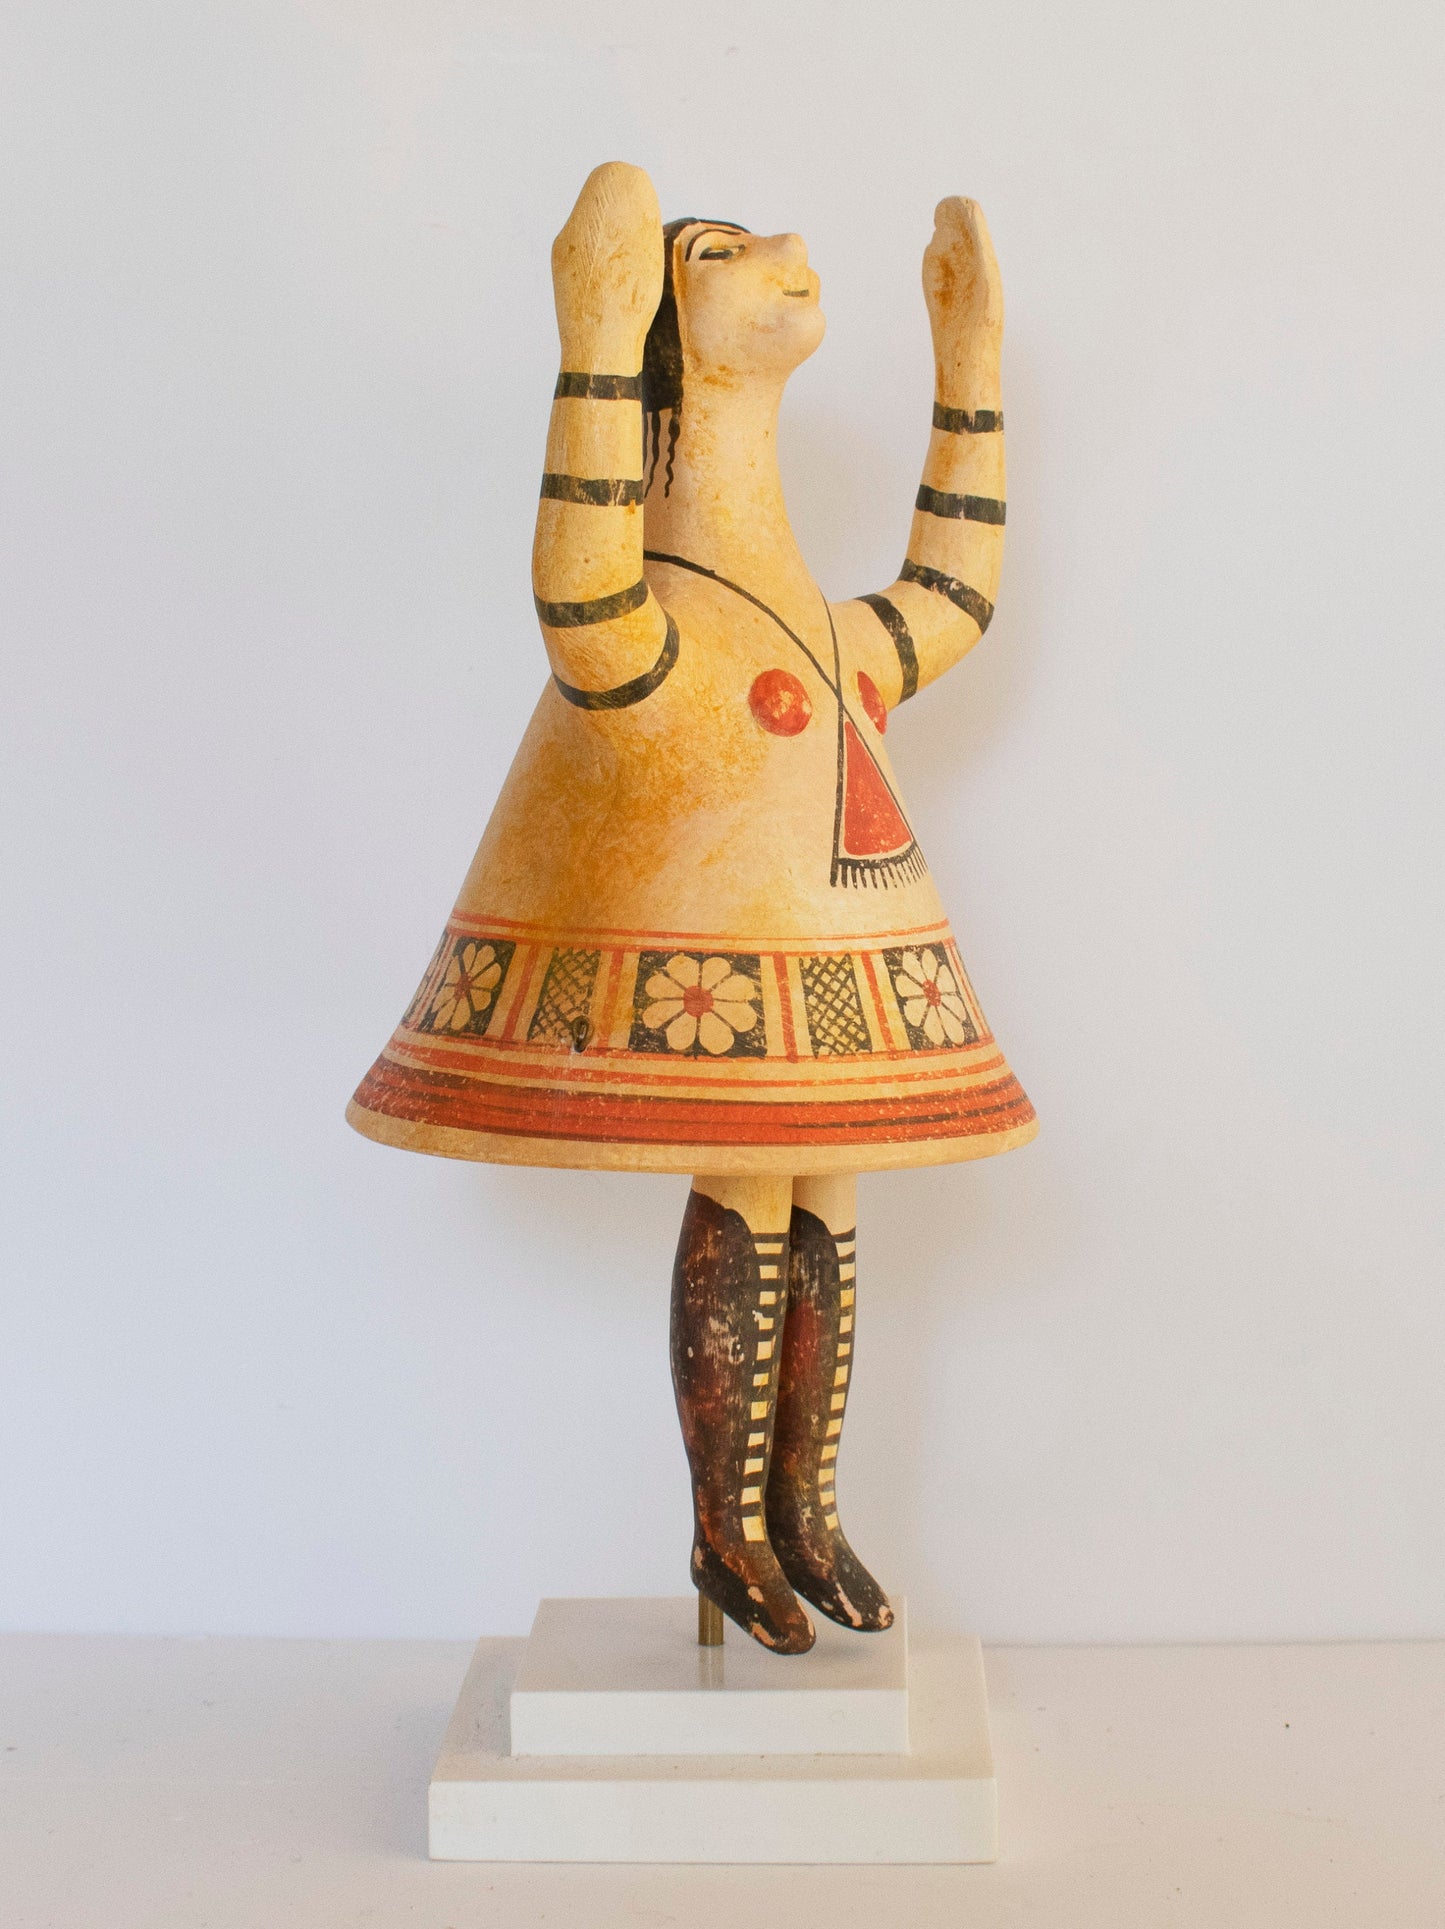 Bell-Shaped Female Figurine - 500 BC - Cyprus - Archaeological Museum of Nicosia - Reproduction - Ceramic Artifact